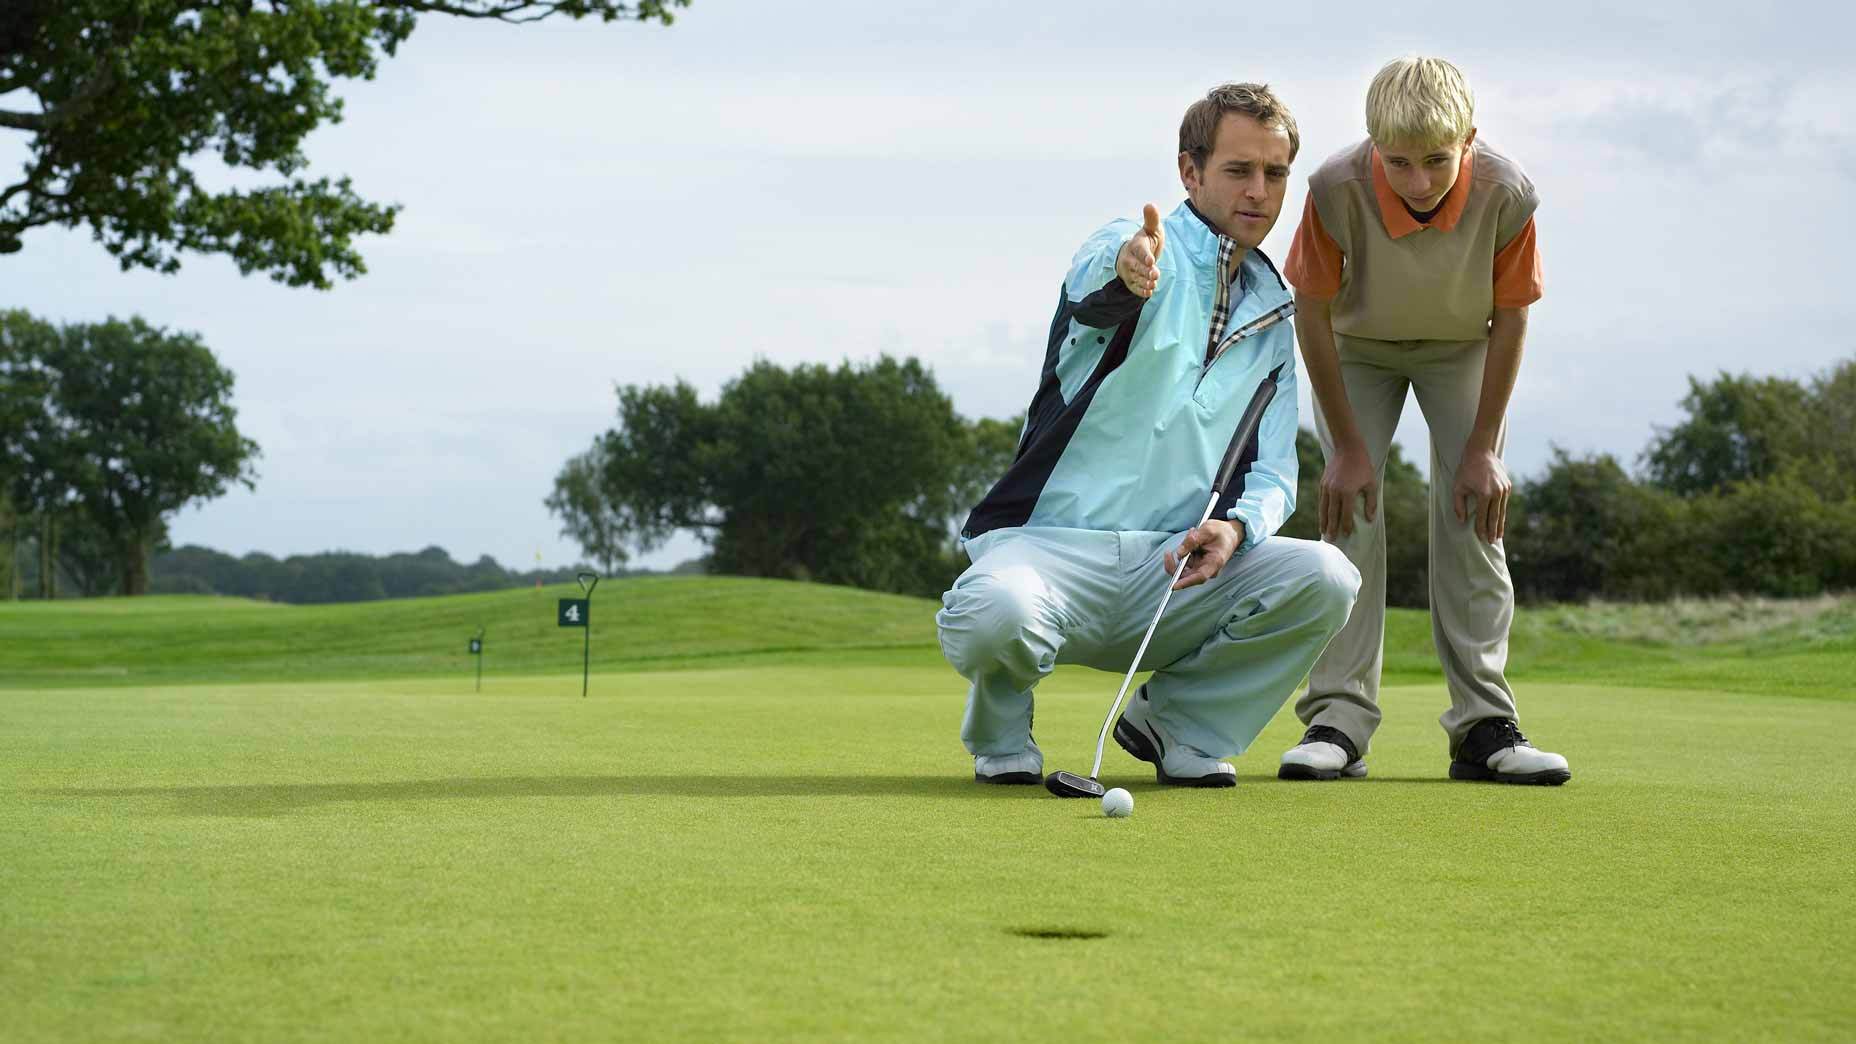 How To Play Golf From A To Z That Golfers Need To Master